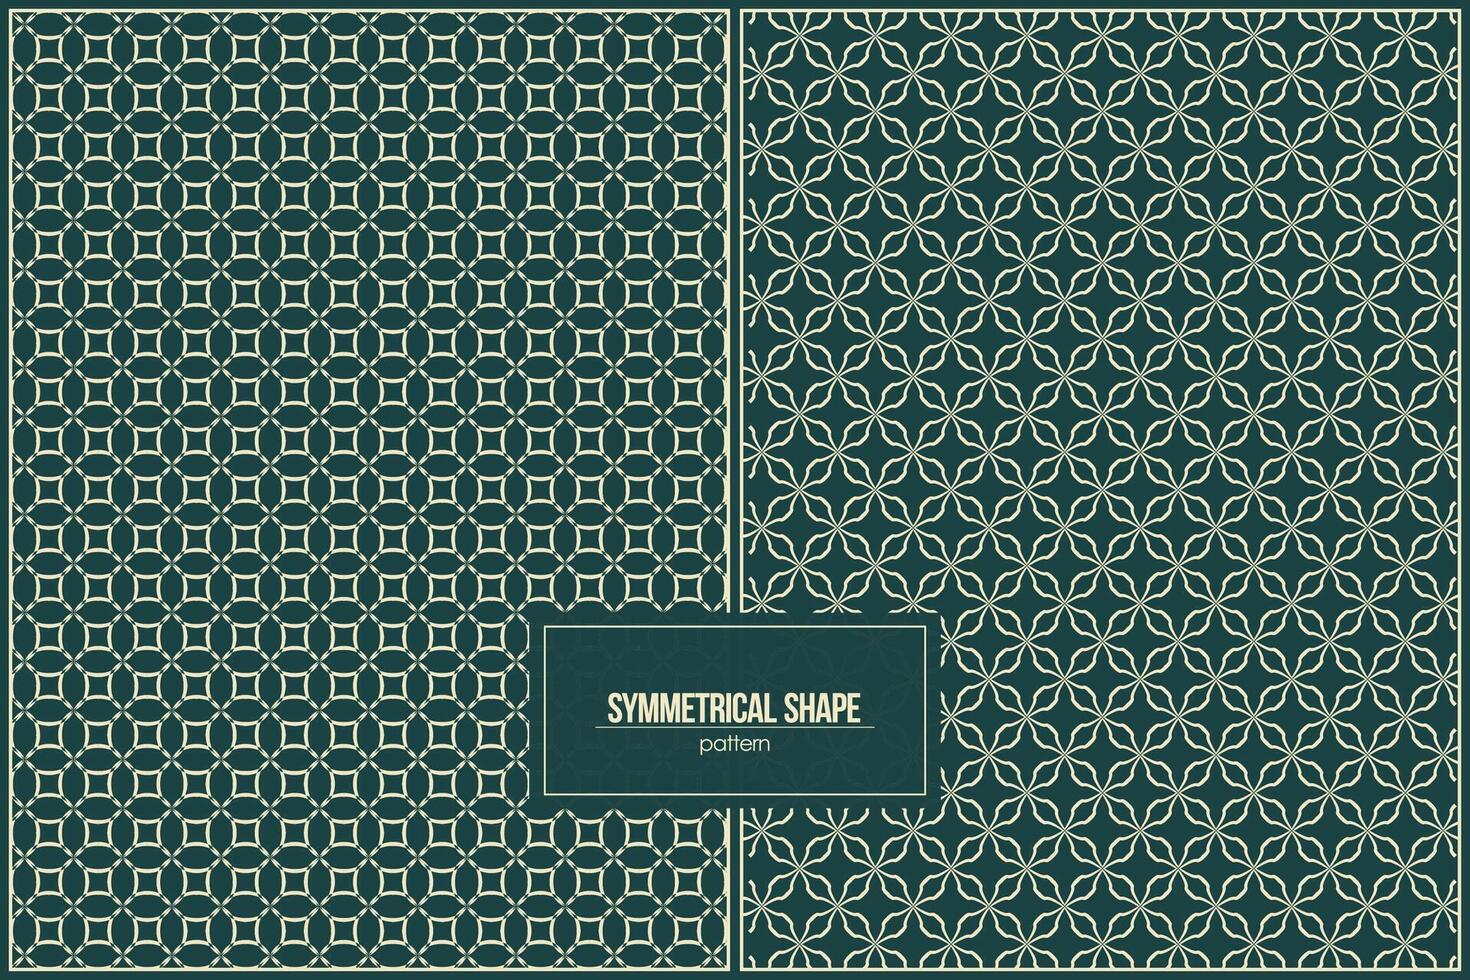 beautiful symmetrical shape pattern with dark green background vector